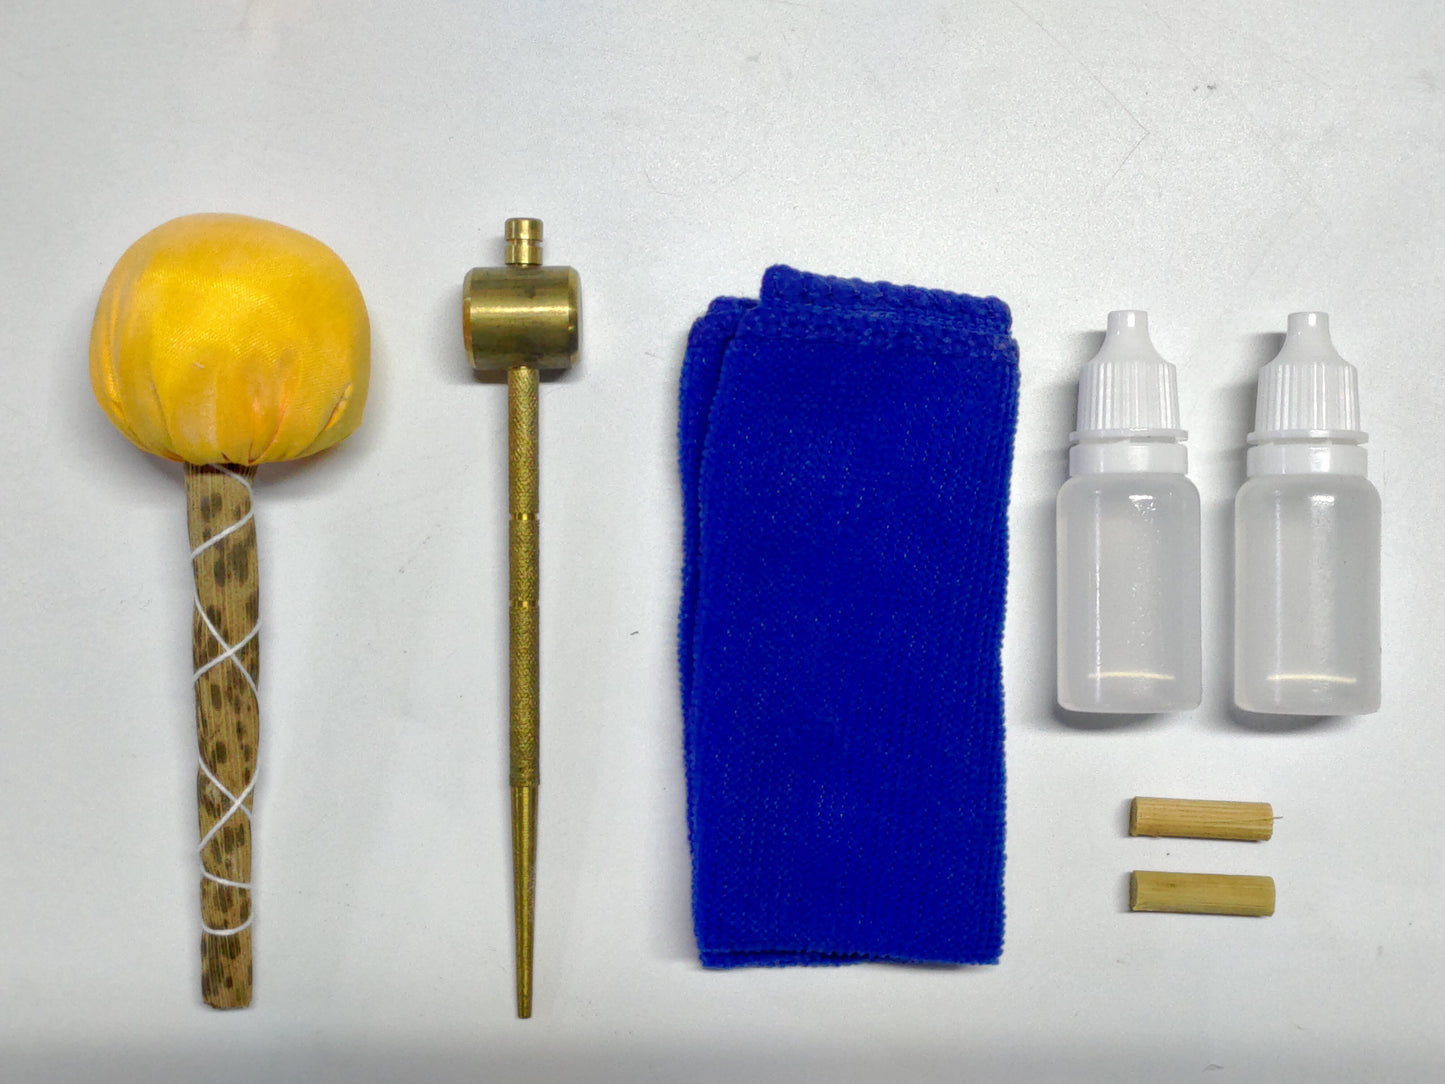 JAPANESE SWORD MAINTENANCE AND CLEANING KIT